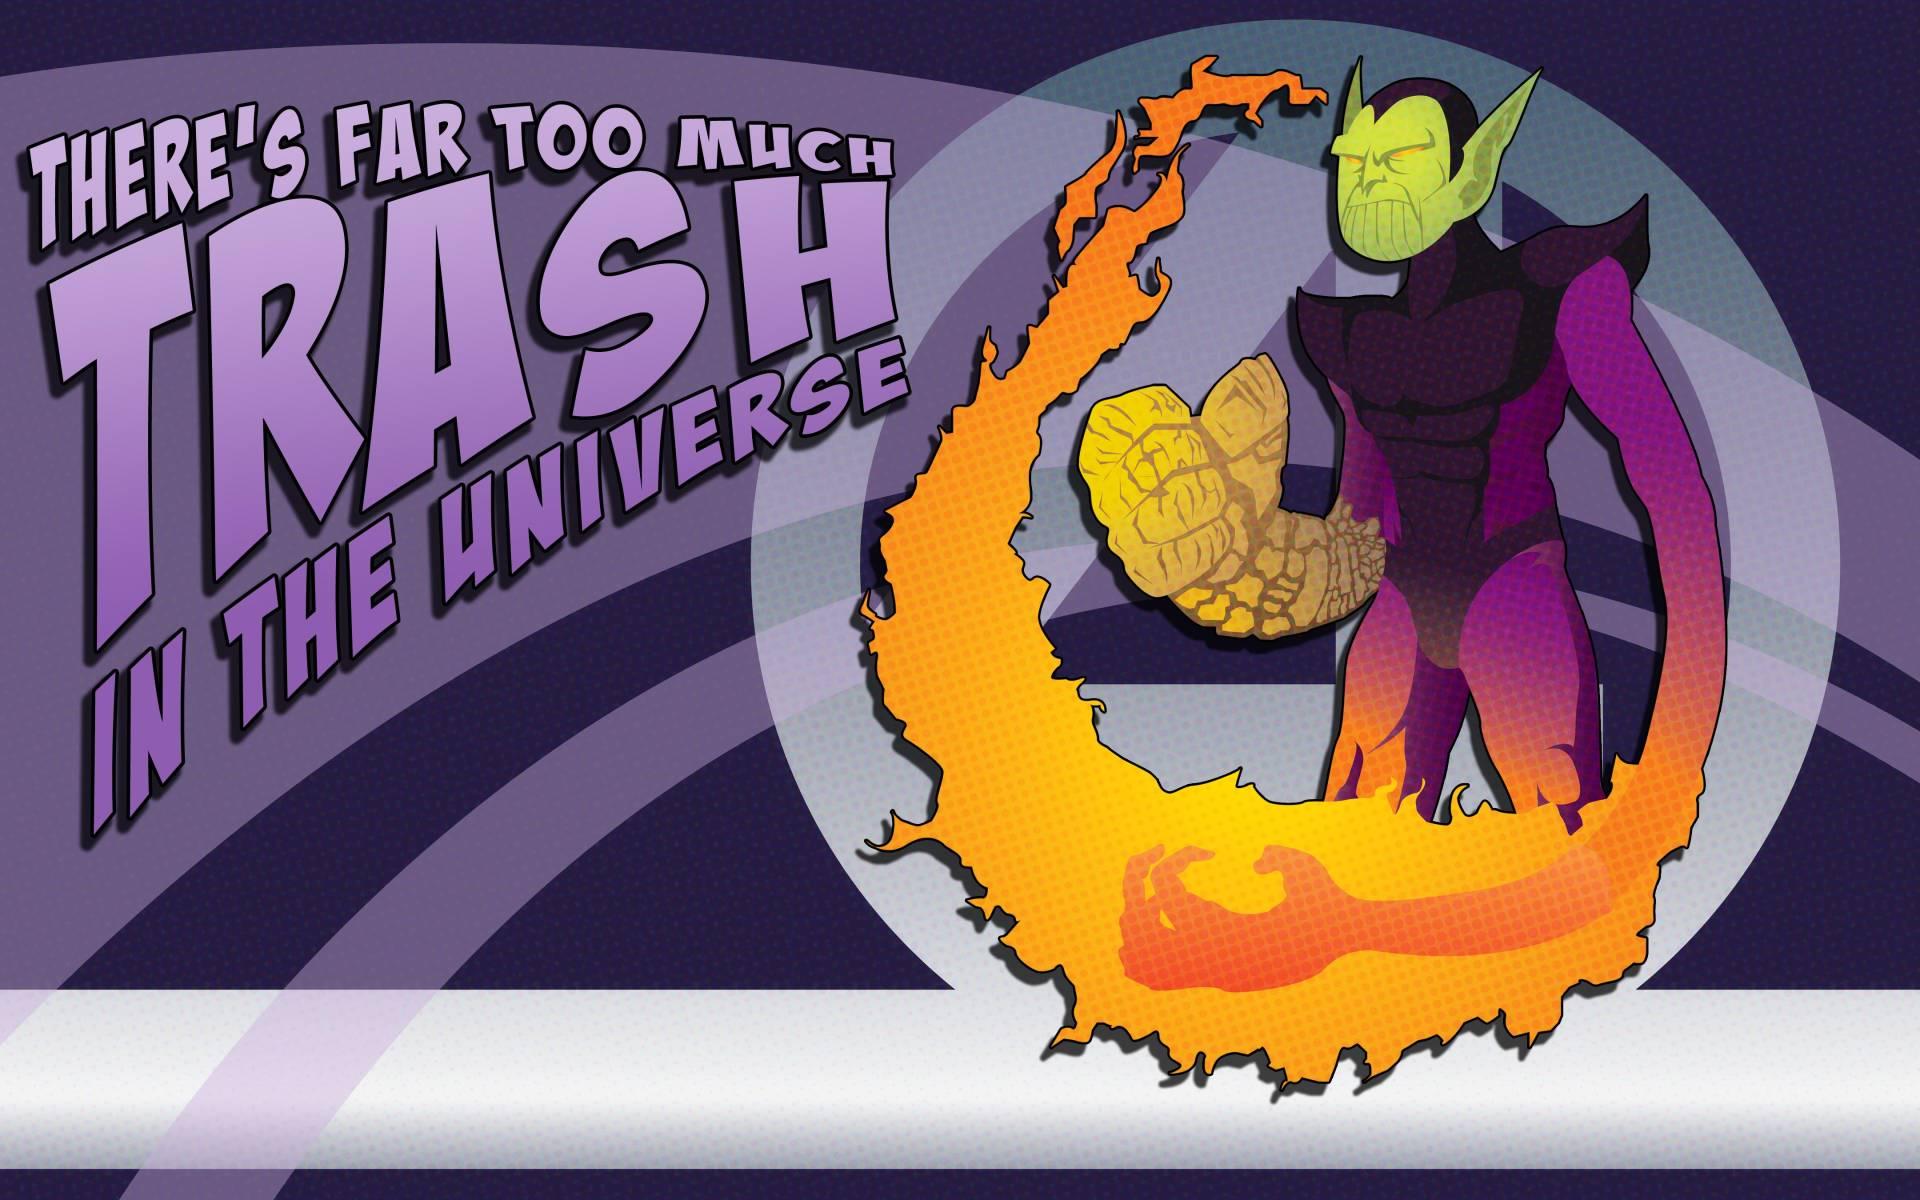 Download the Trash In The Universe Wallpaper, Trash In The Universe